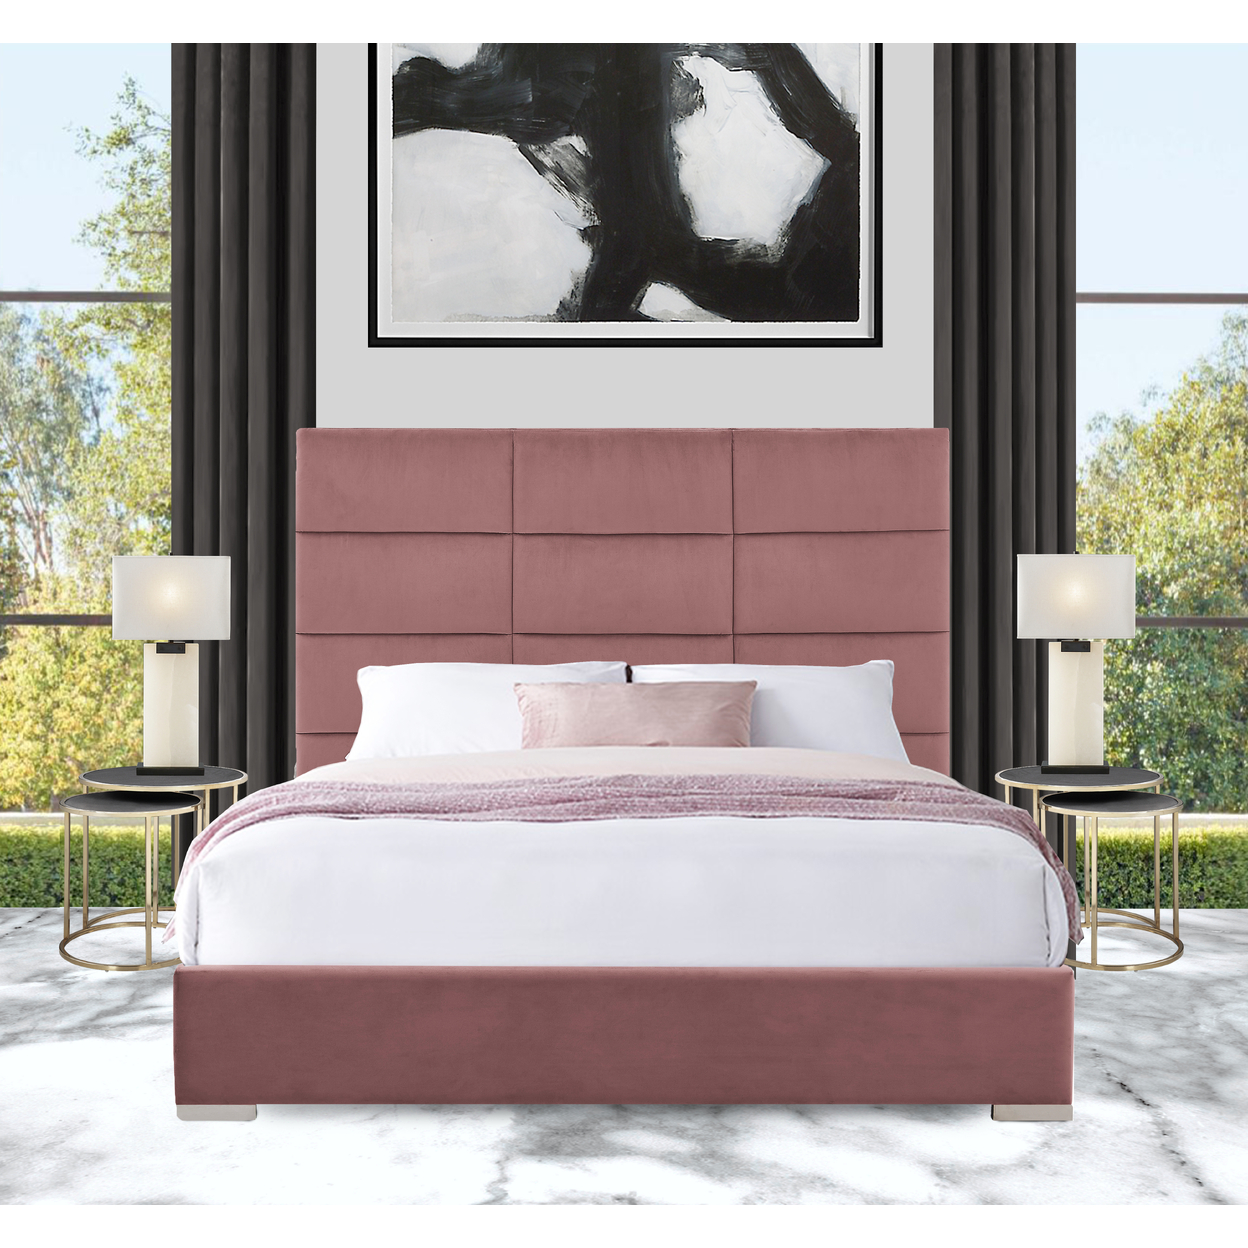 Iconic Home Durazzo Storage Platform Bed Frame With Headboard Velvet Upholstered Box Quilted, Modern Contemporary - Dark Blush, Queen